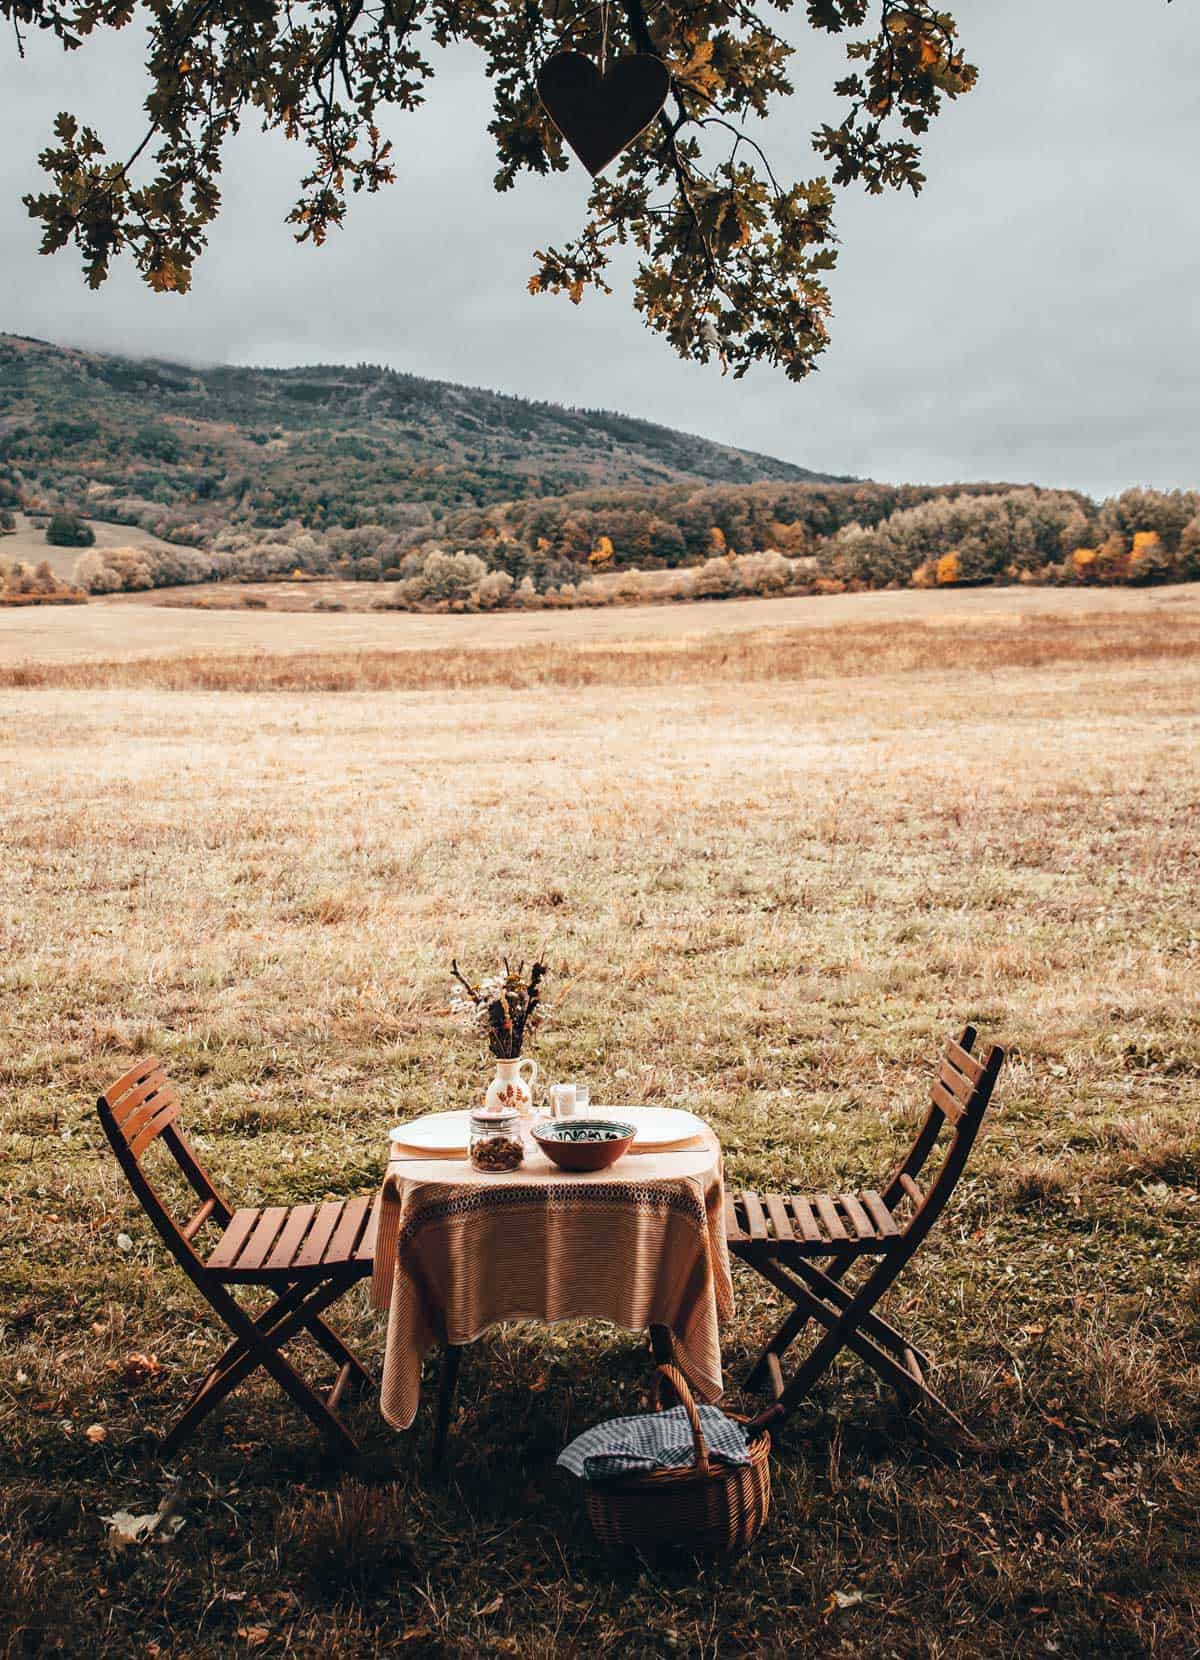 A fall themed picnic table and chairs in a field with a tree in the background.